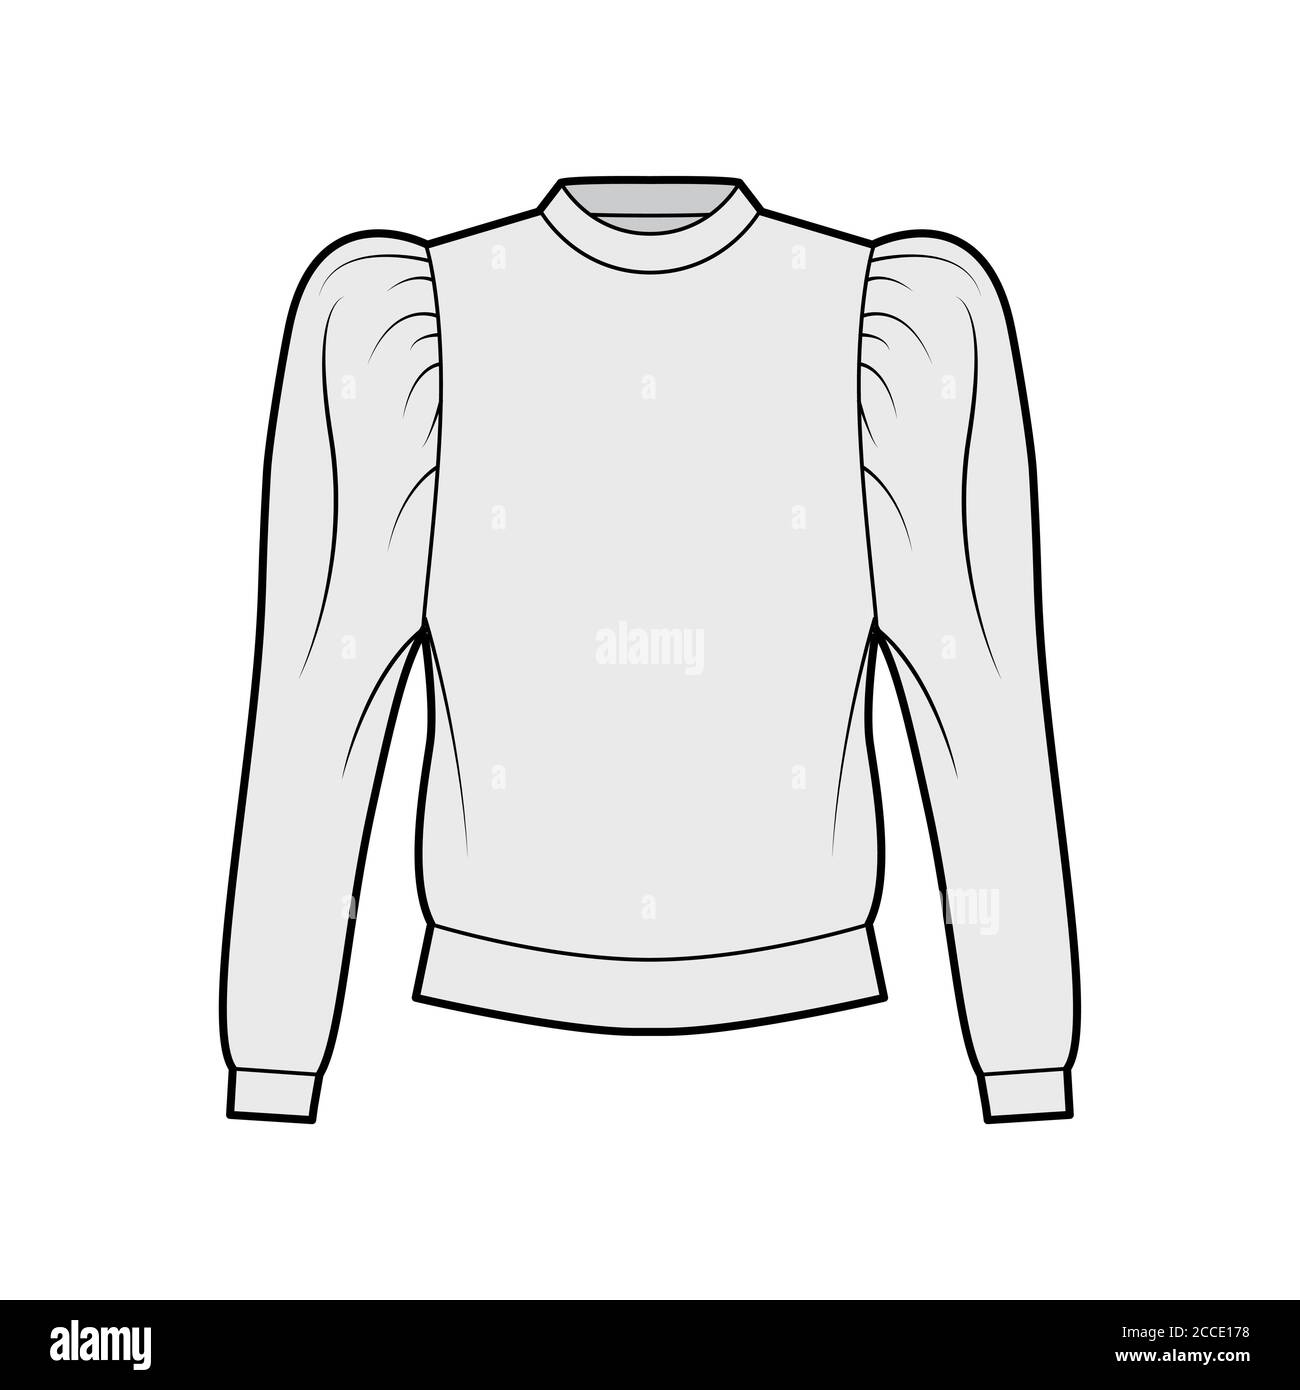 Cotton-jersey sweatshirt technical fashion illustration with relaxed fit, crew neckline, gathered, puffy long sleeves. Flat jumper apparel template front grey color. Women, men, unisex top CAD mockup Stock Vector